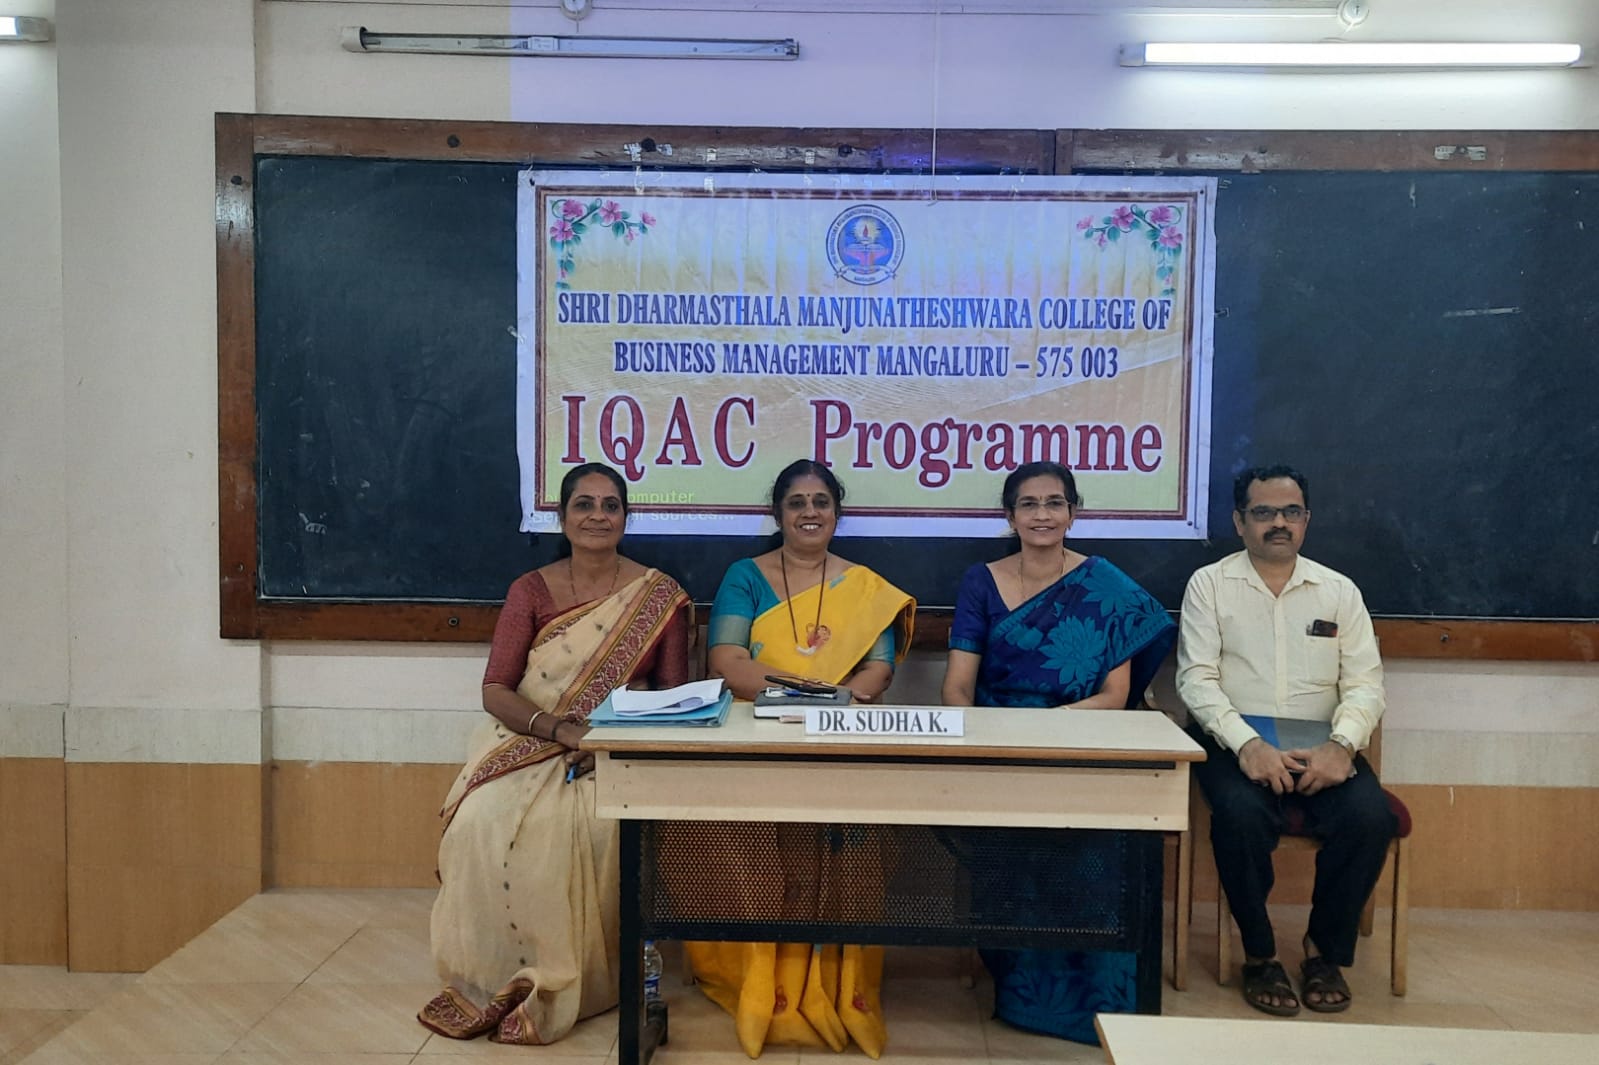 Faculty Development Programme on “Research Publication”